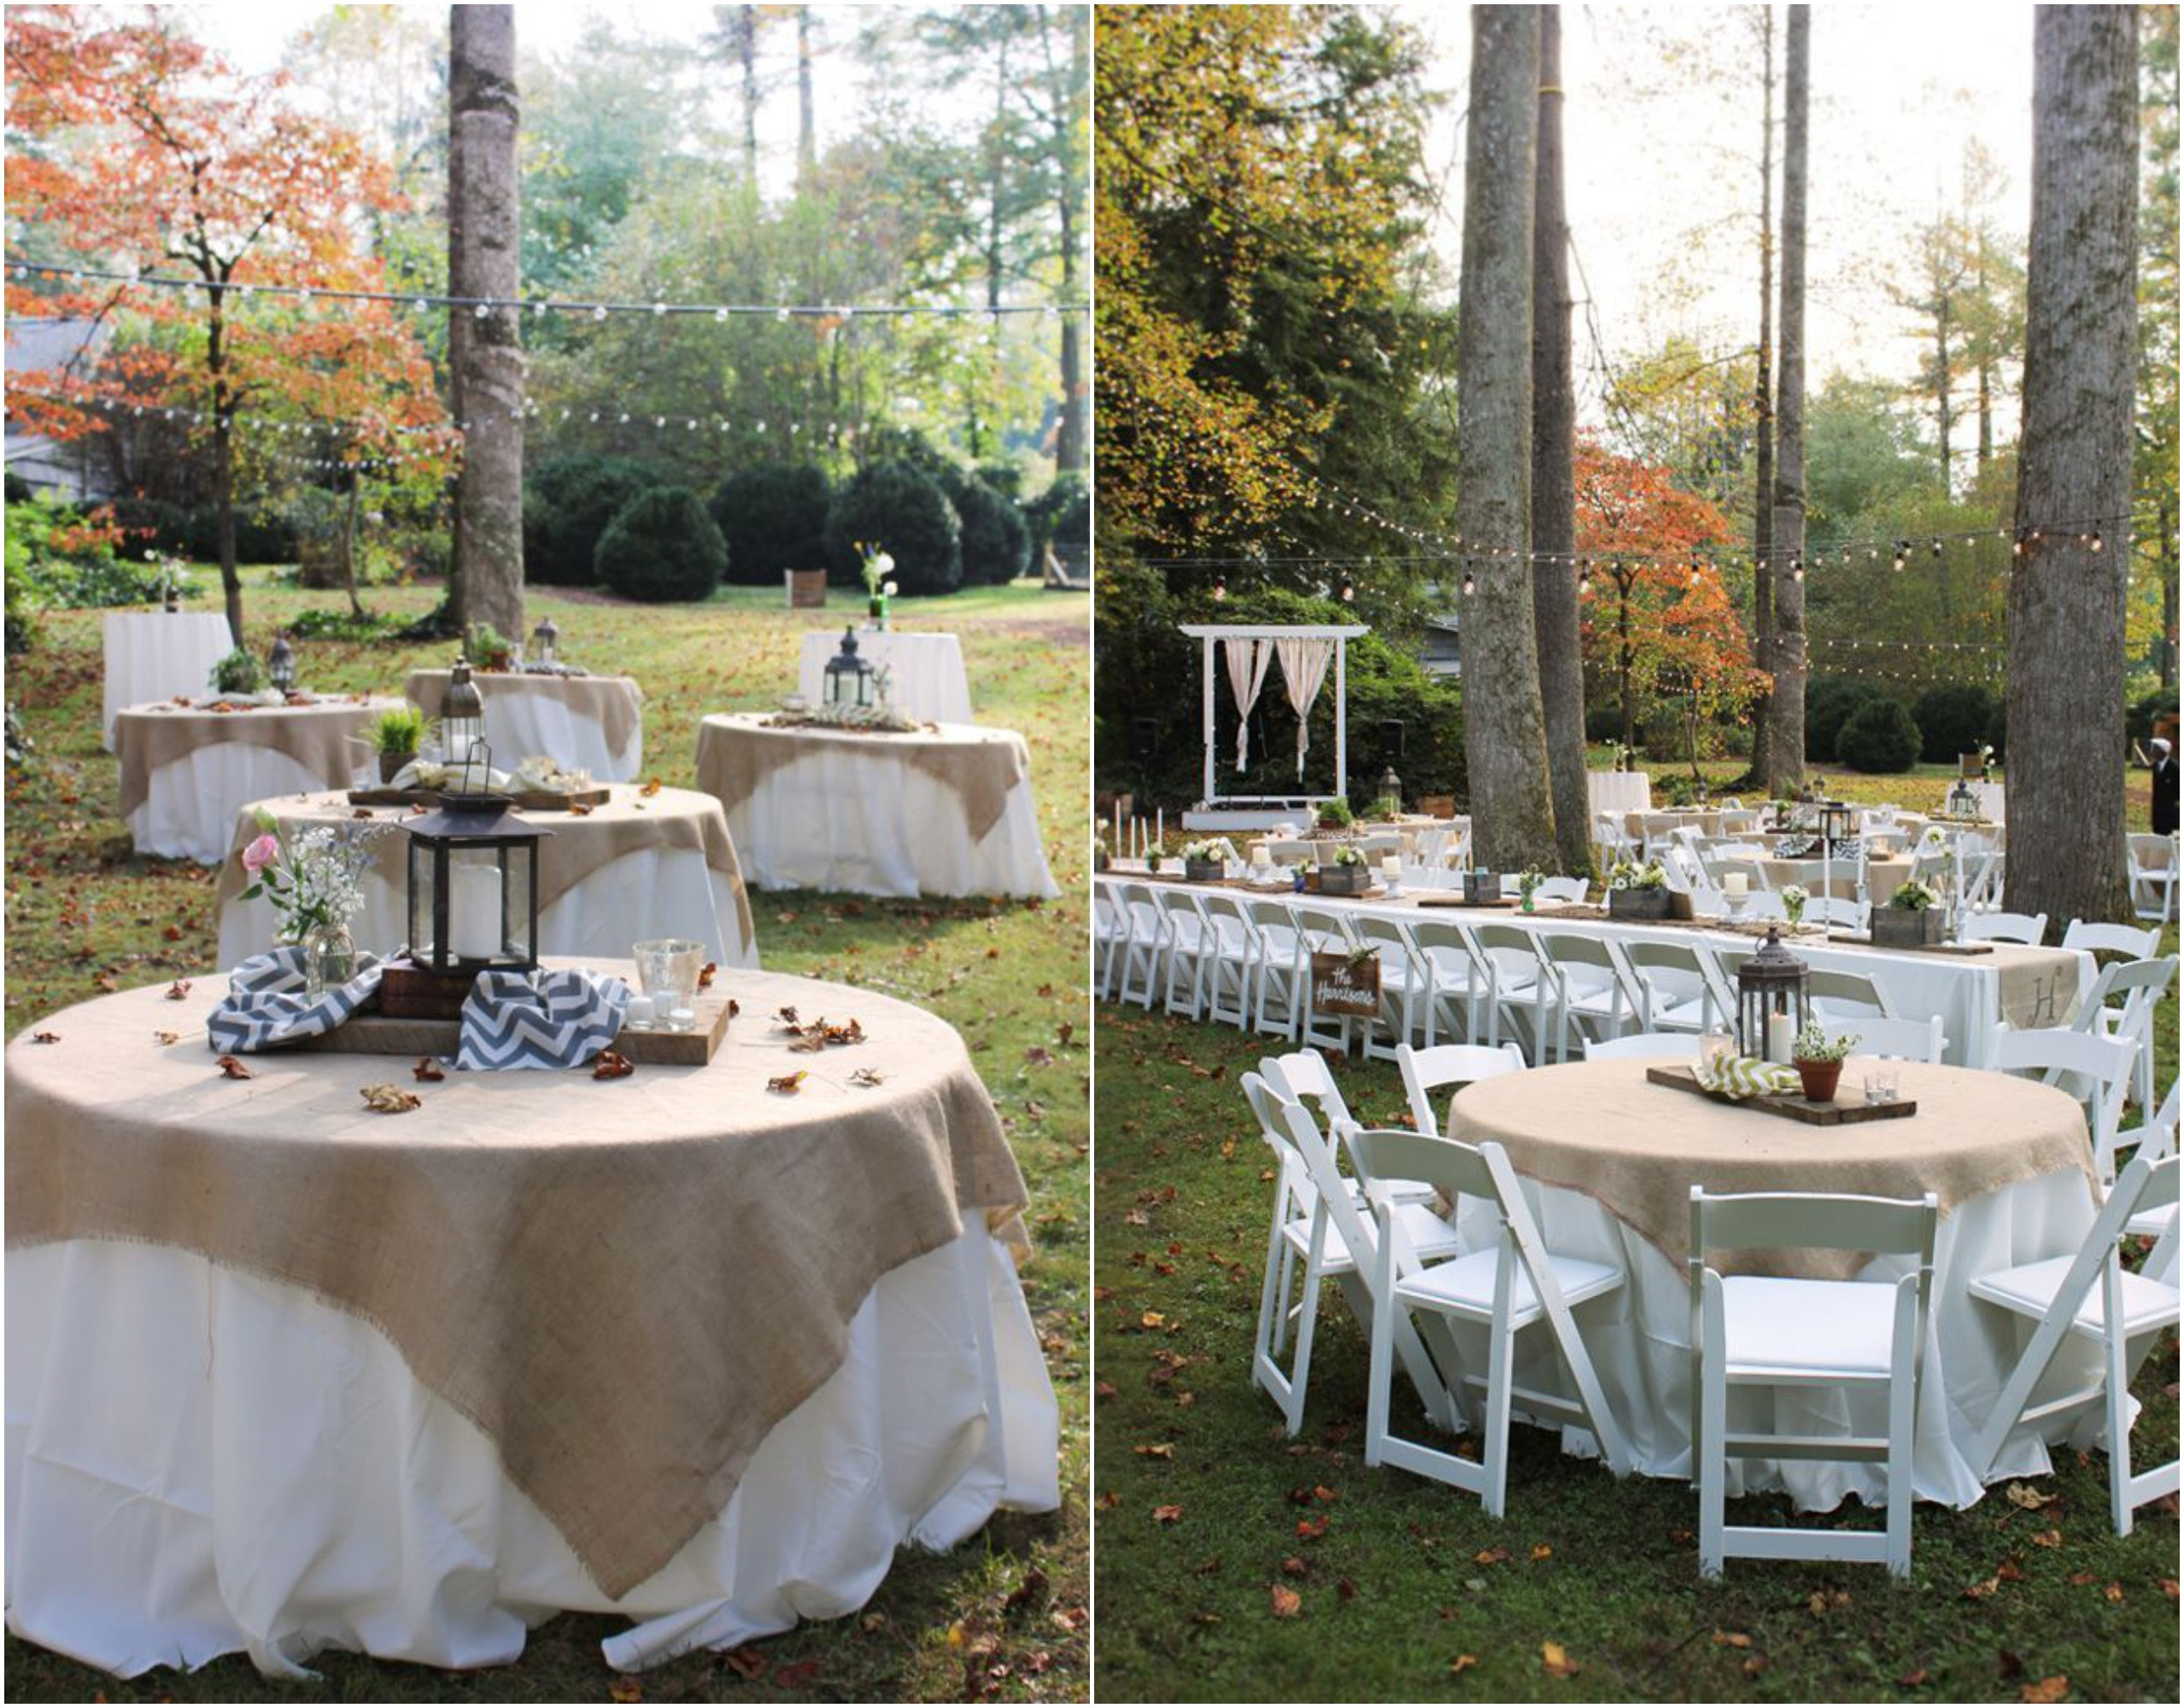 Outside Wedding Decor
 Noteable Expressions 10 HOT WEDDING TRENDS FOR 2014